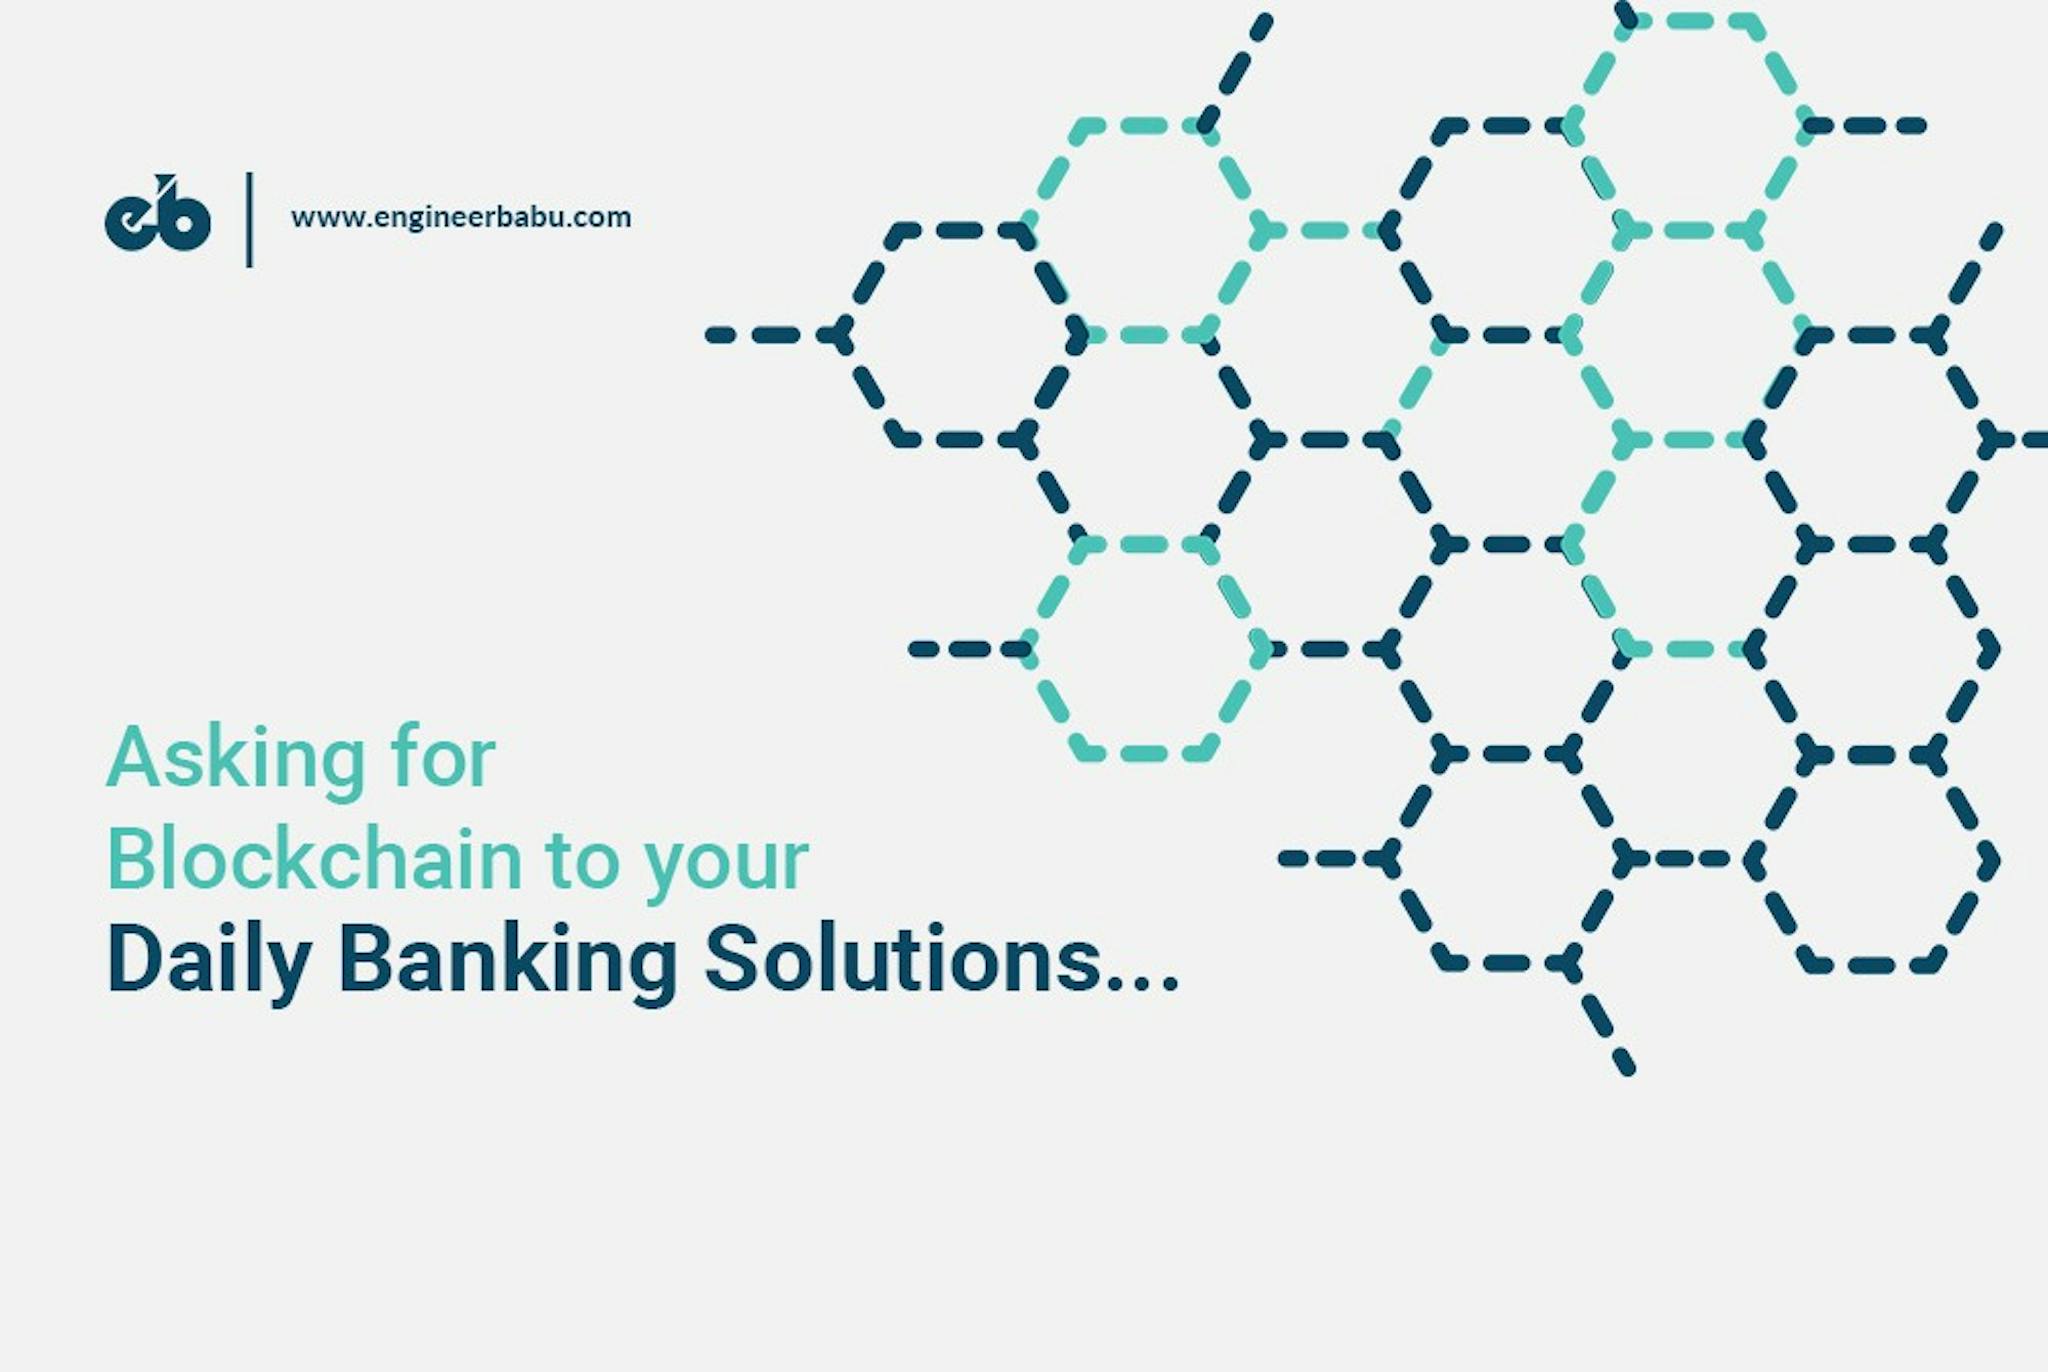 featured image - Asking for Blockchain in Your Daily Banking Solutions